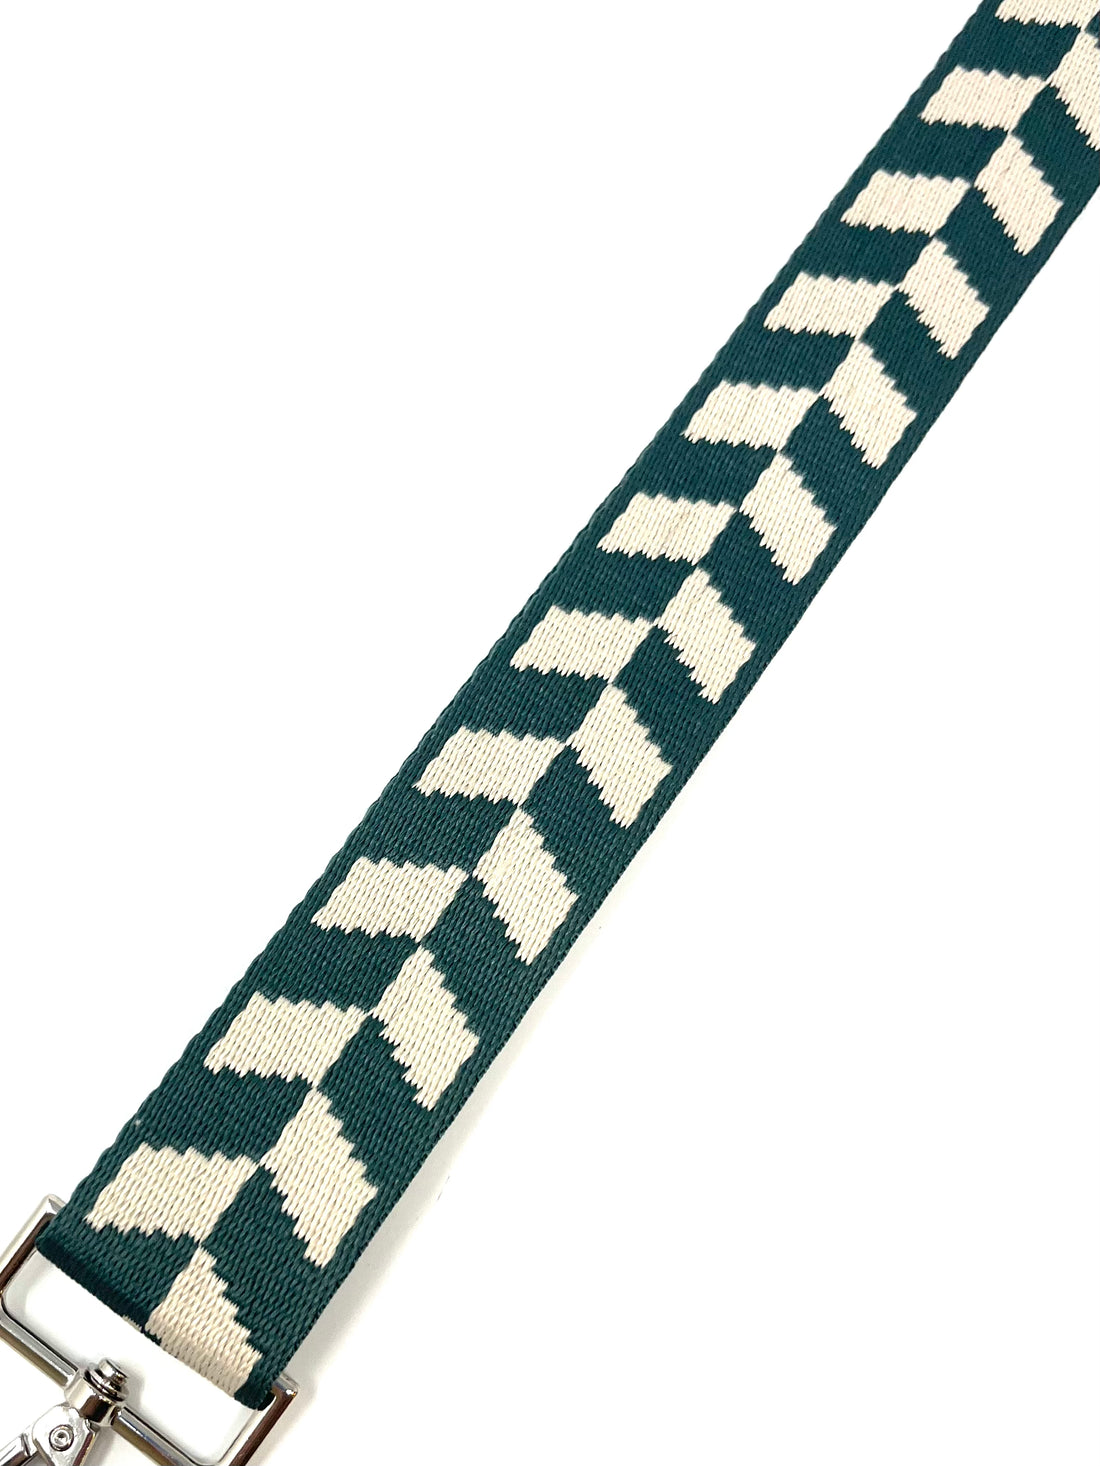 Feather Strap in Teal